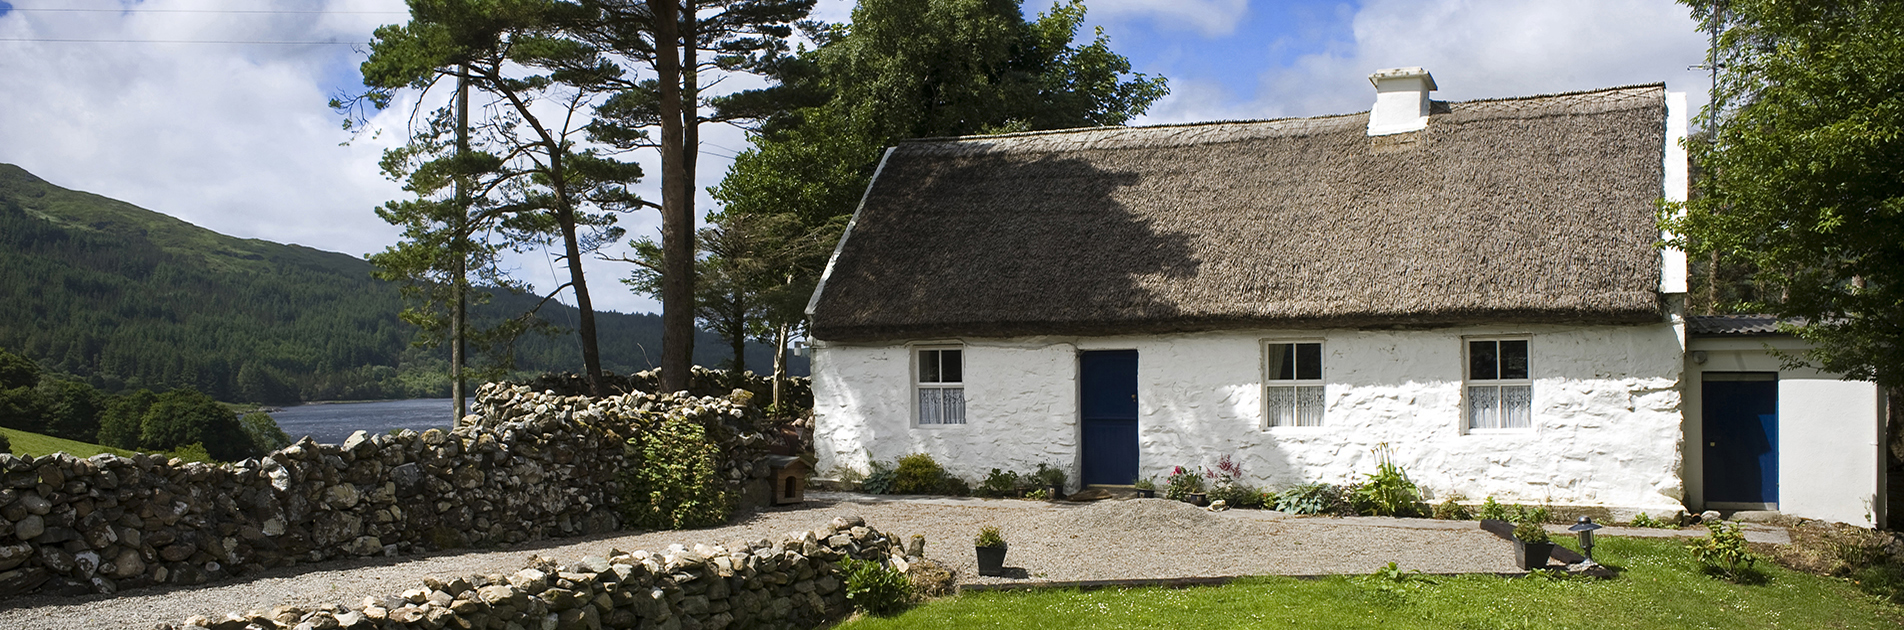 Mac Tours Ireland Crofters Cottage Galway